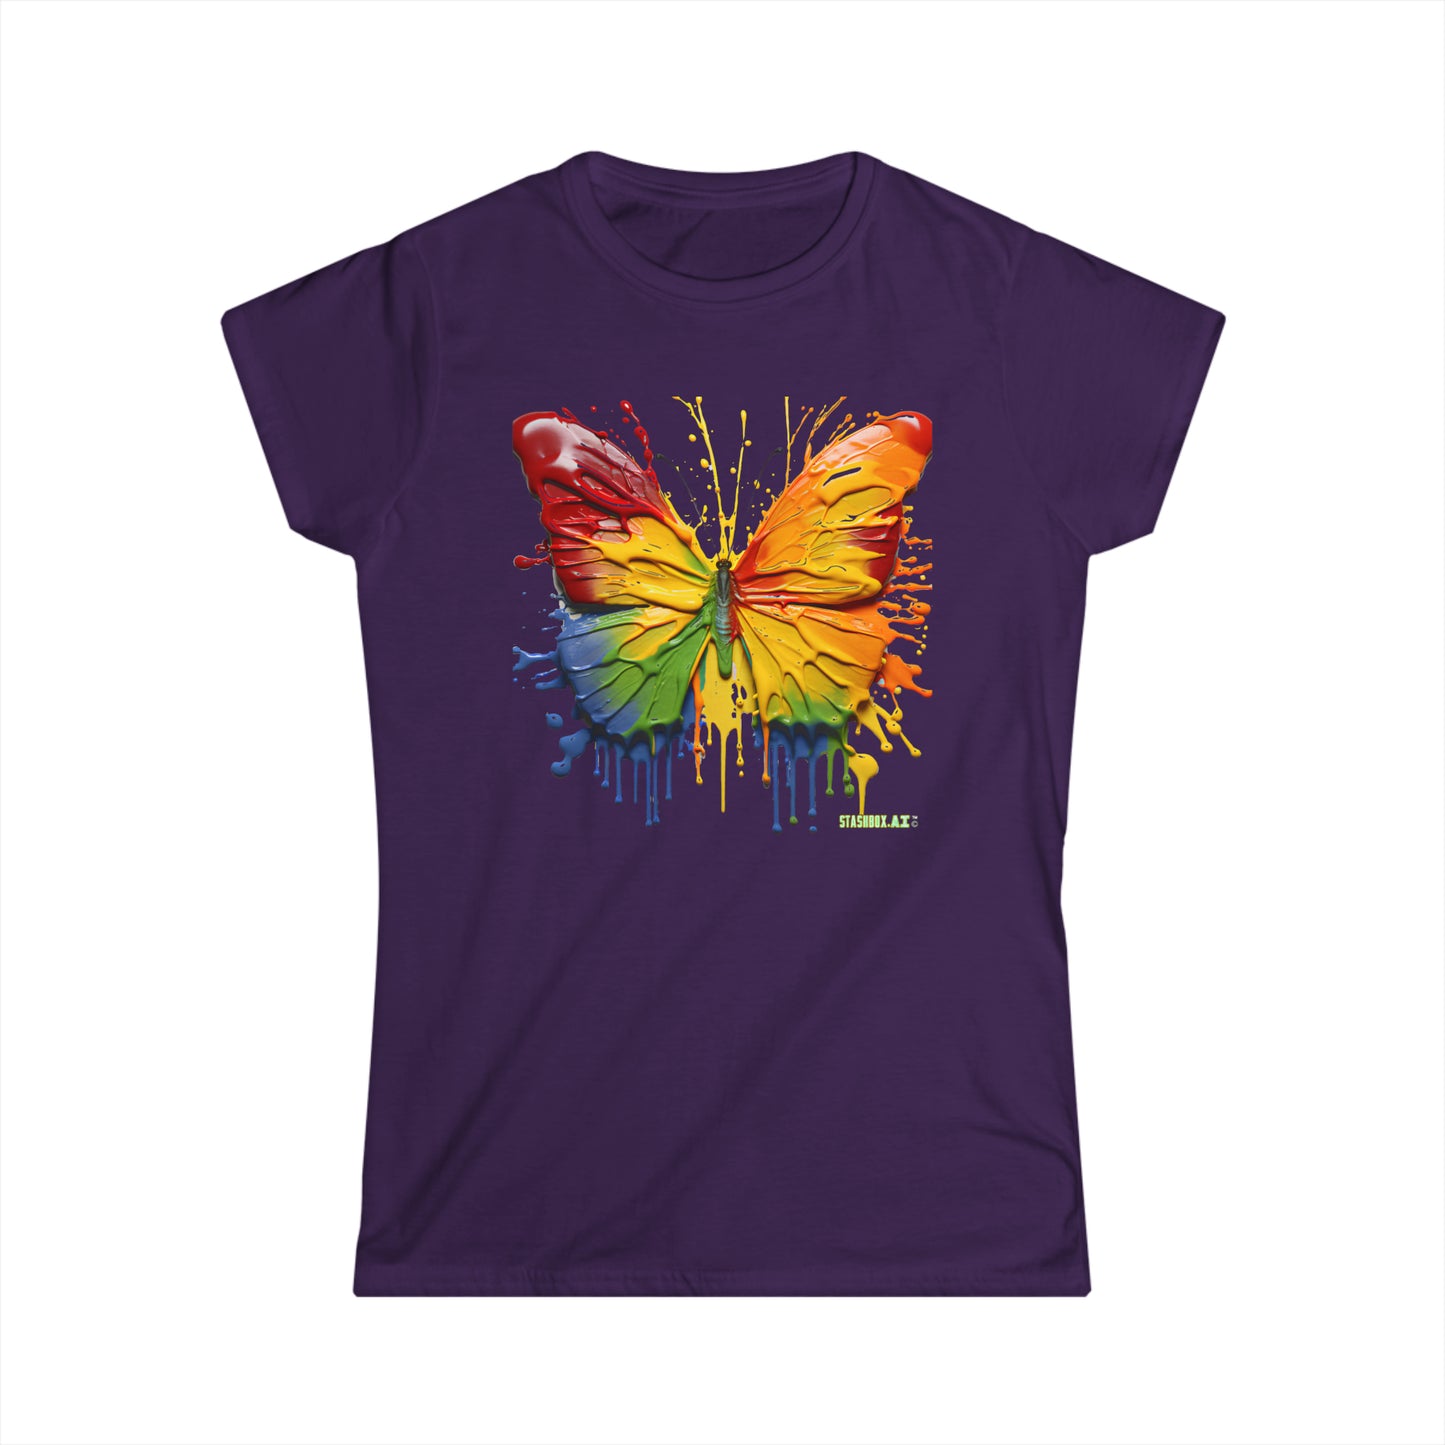 Women's Softstyle Tee - Colorful Butterfly 003